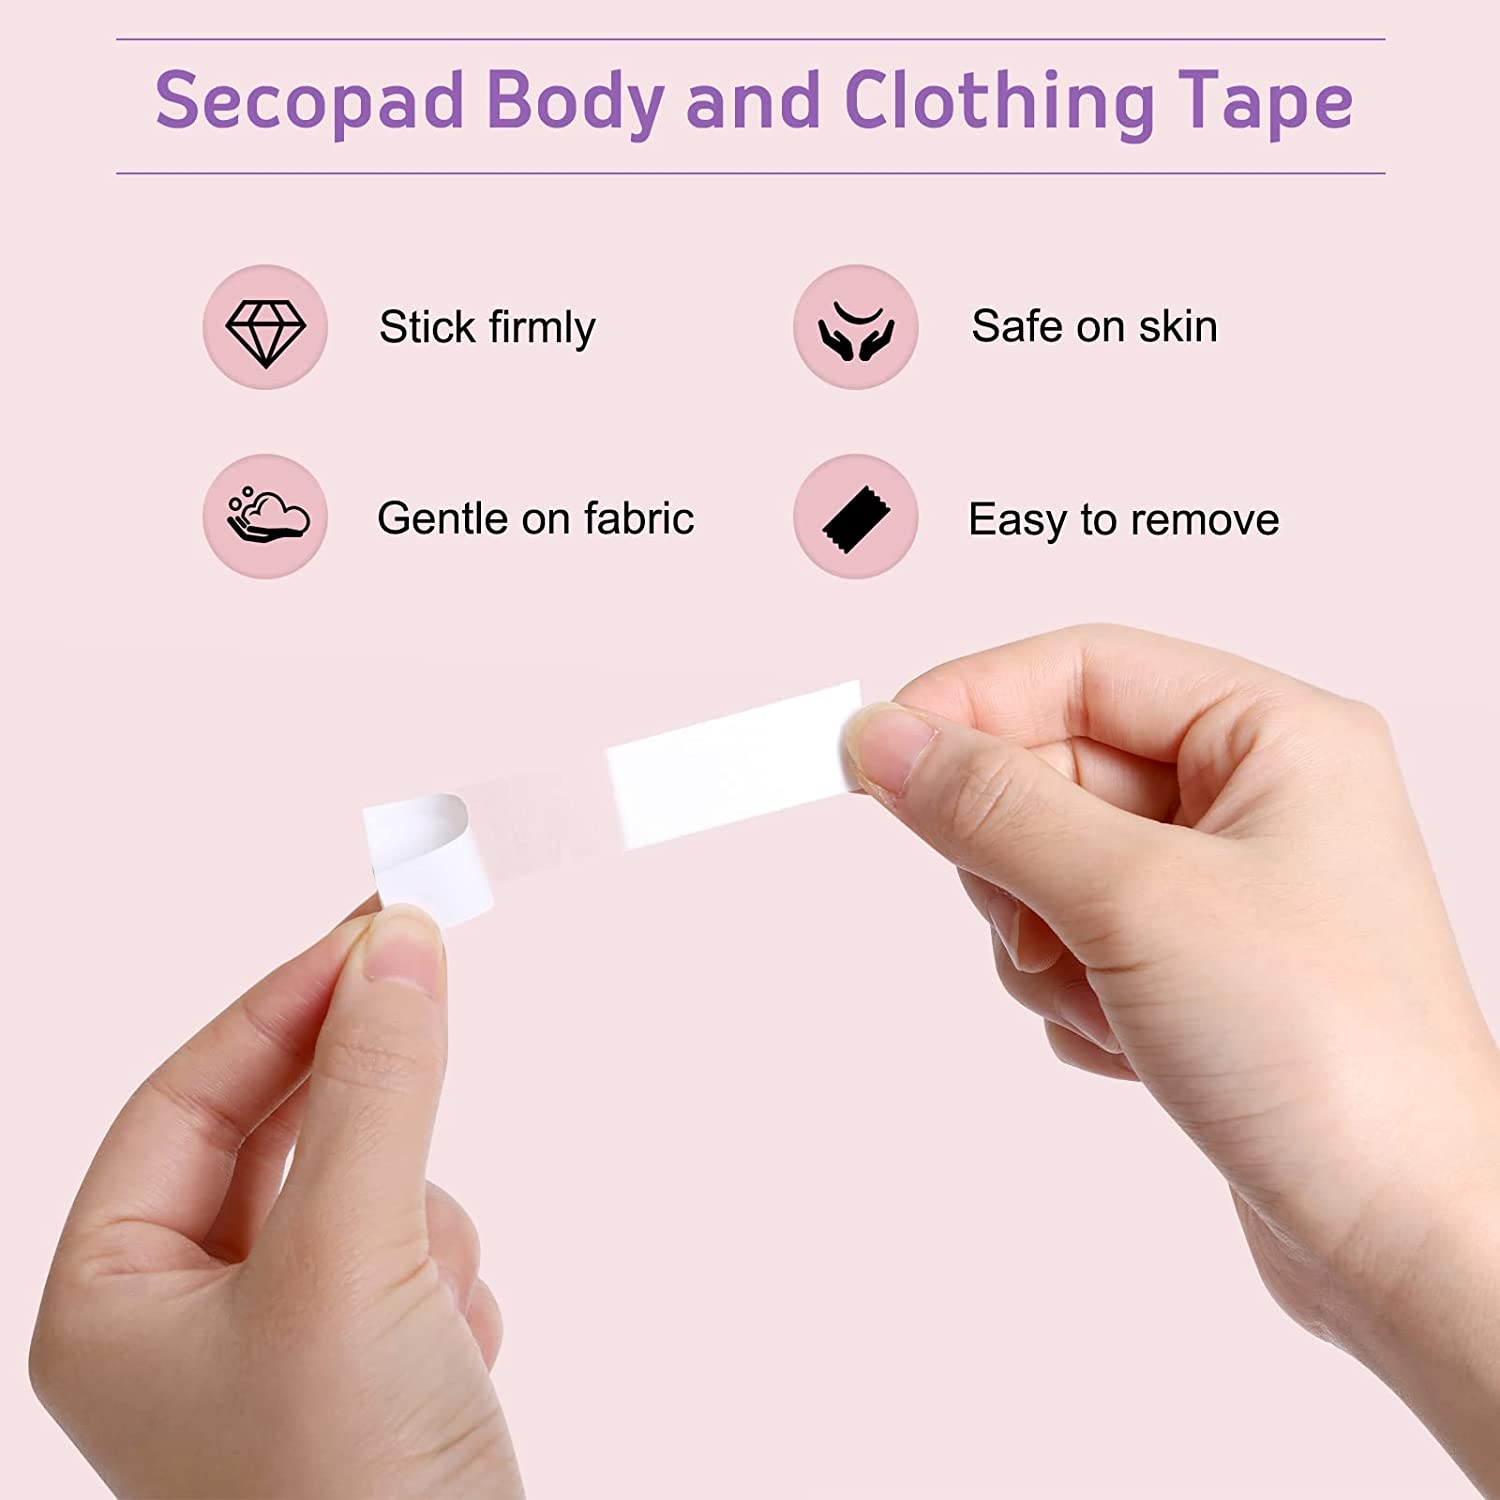 Secopad Double Sided Tape for Clothes, 60 Pack Fashion Fabric Tape for Skin, Strong Adhesive Body Tape for Women, Gentle Clear Dress Tape